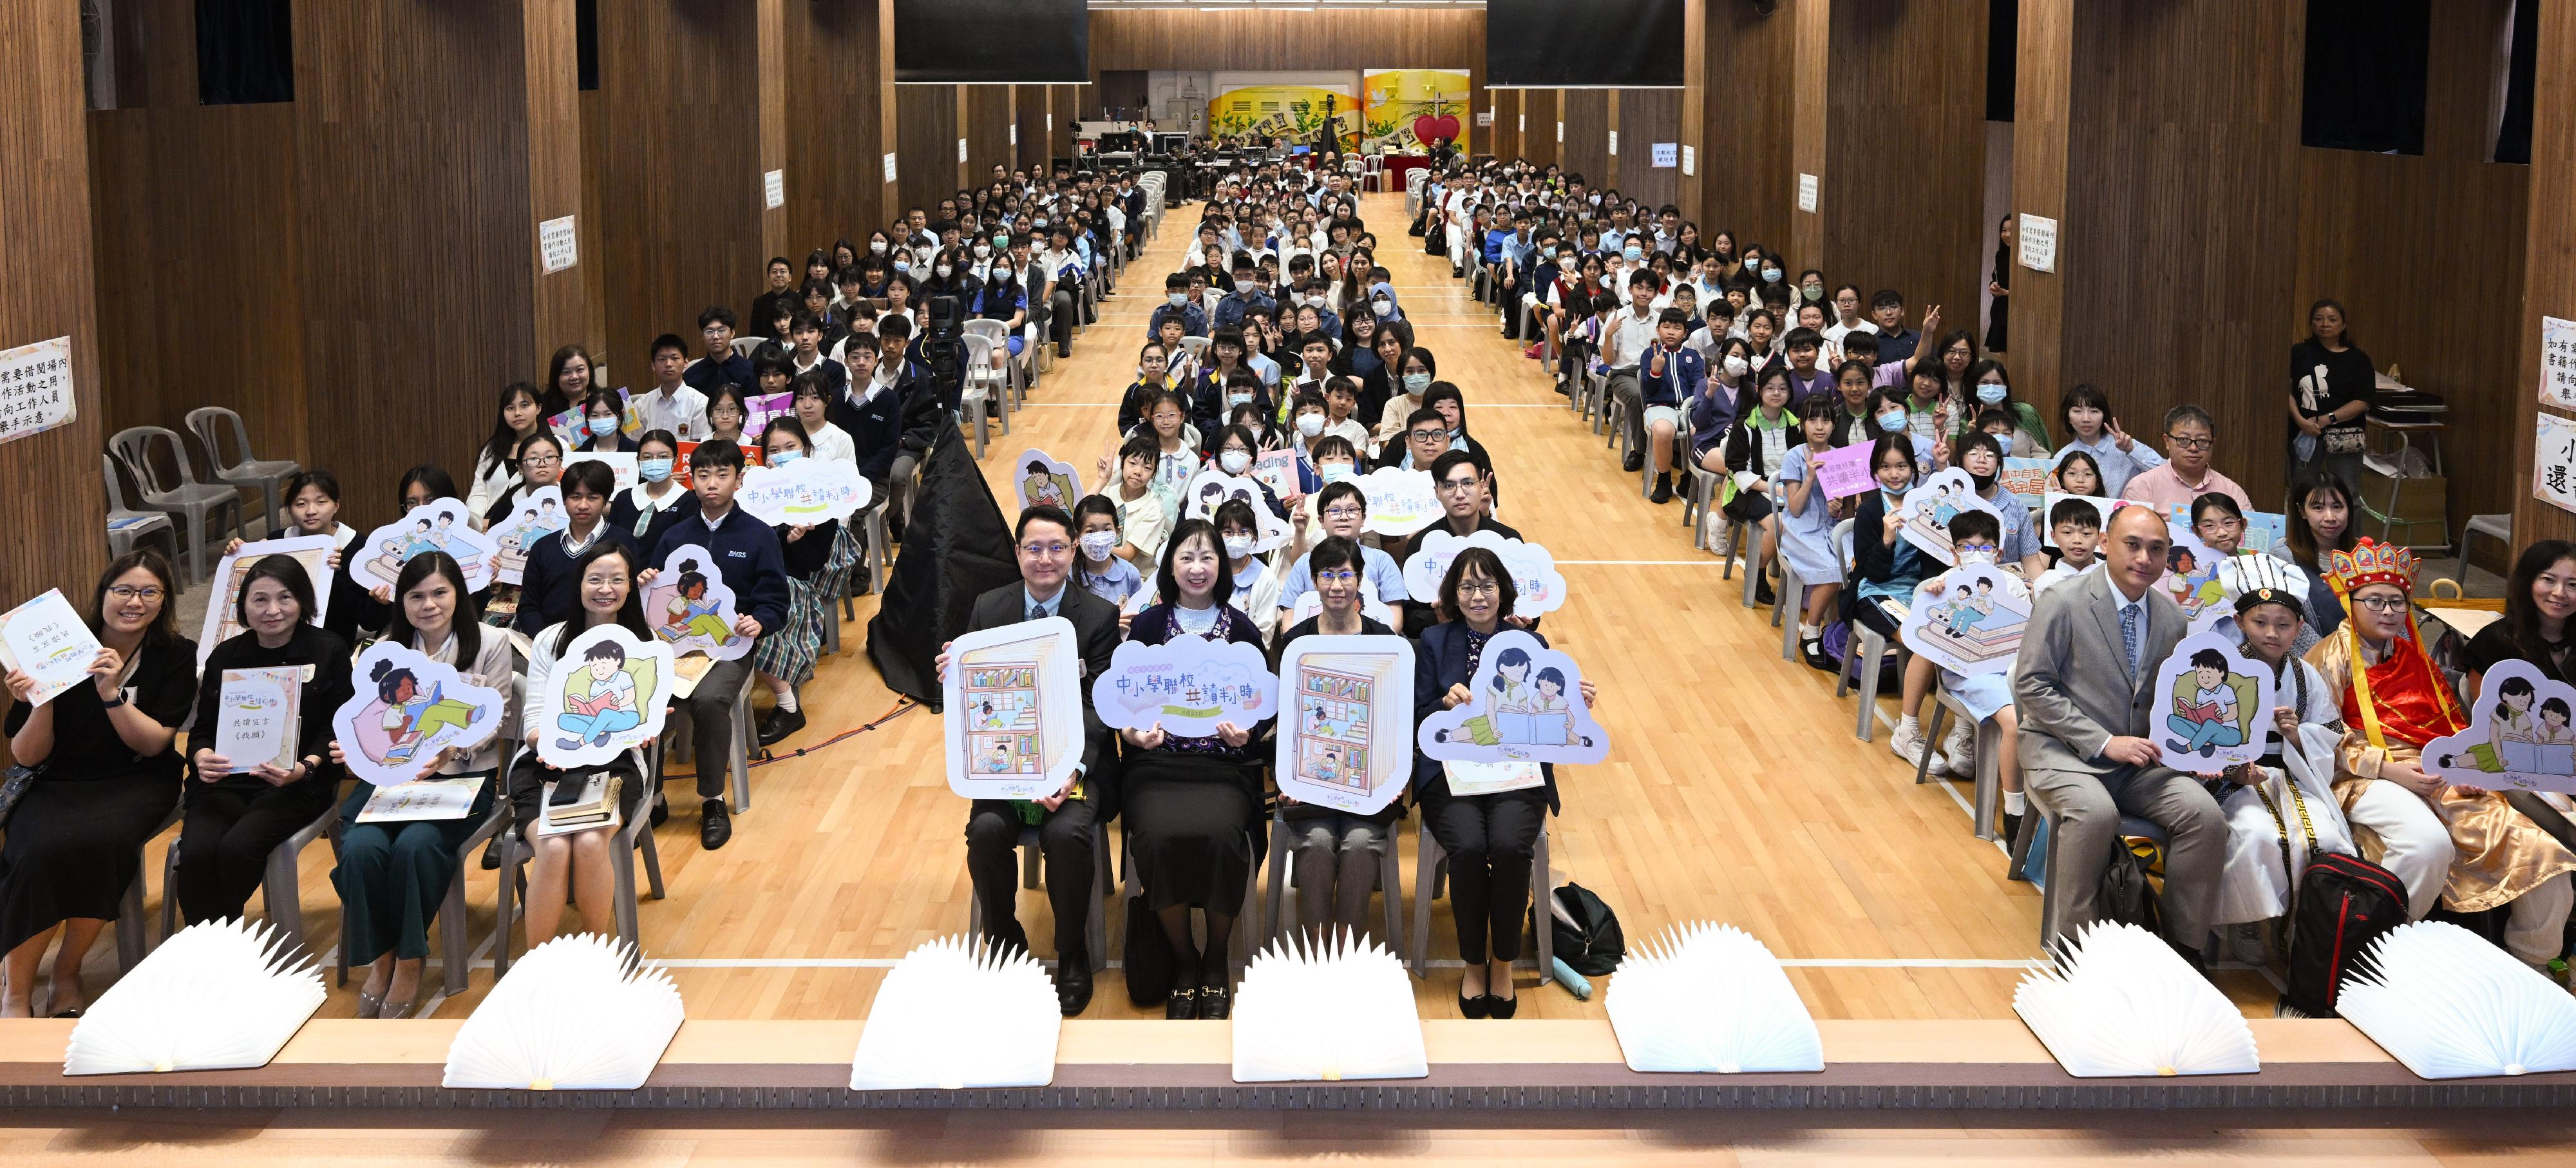 The Education Bureau held joint secondary and primary school 30-minute reading activities, on the first Hong Kong Reading for All Day today (April 23) with more than 220 schools participating. Photo shows the Permanent Secretary for Education, Ms Michelle Li (second left, front row); the Chief Librarian of Hong Kong Public Libraries Ms Carmen Tse (second right, front row); and the Principal of the HKSKH Bishop Hall Secondary School, Mr Kam Wai-ming (first left, front row), attending the opening ceremony at the school with other guests.